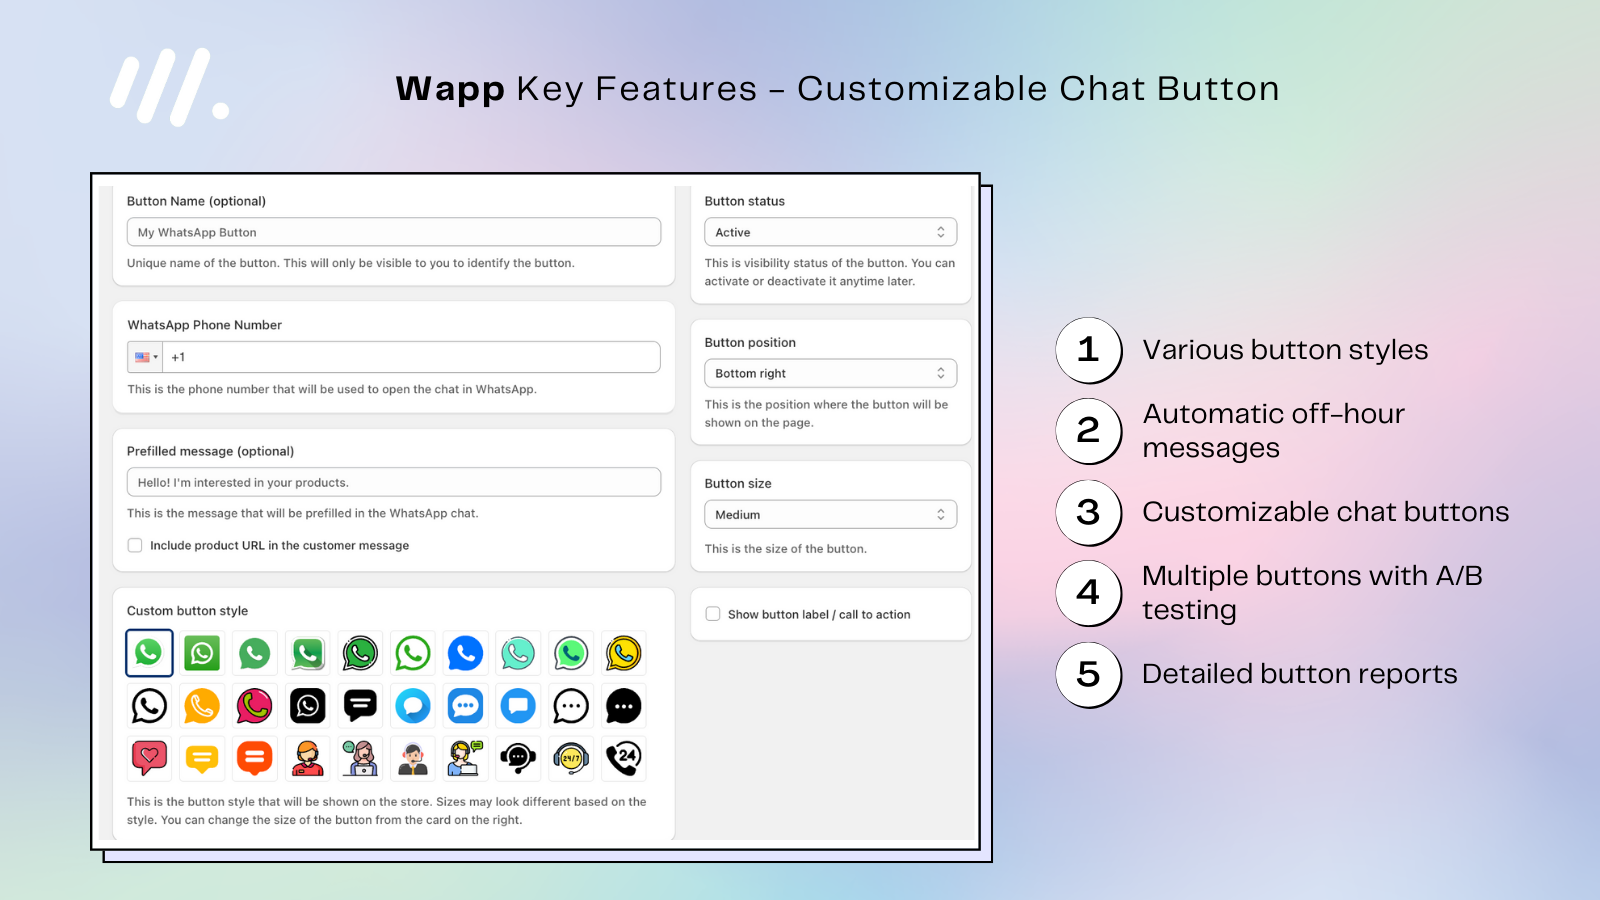 Wapp - WhatsApp Chat Button & abandoned cart recovery